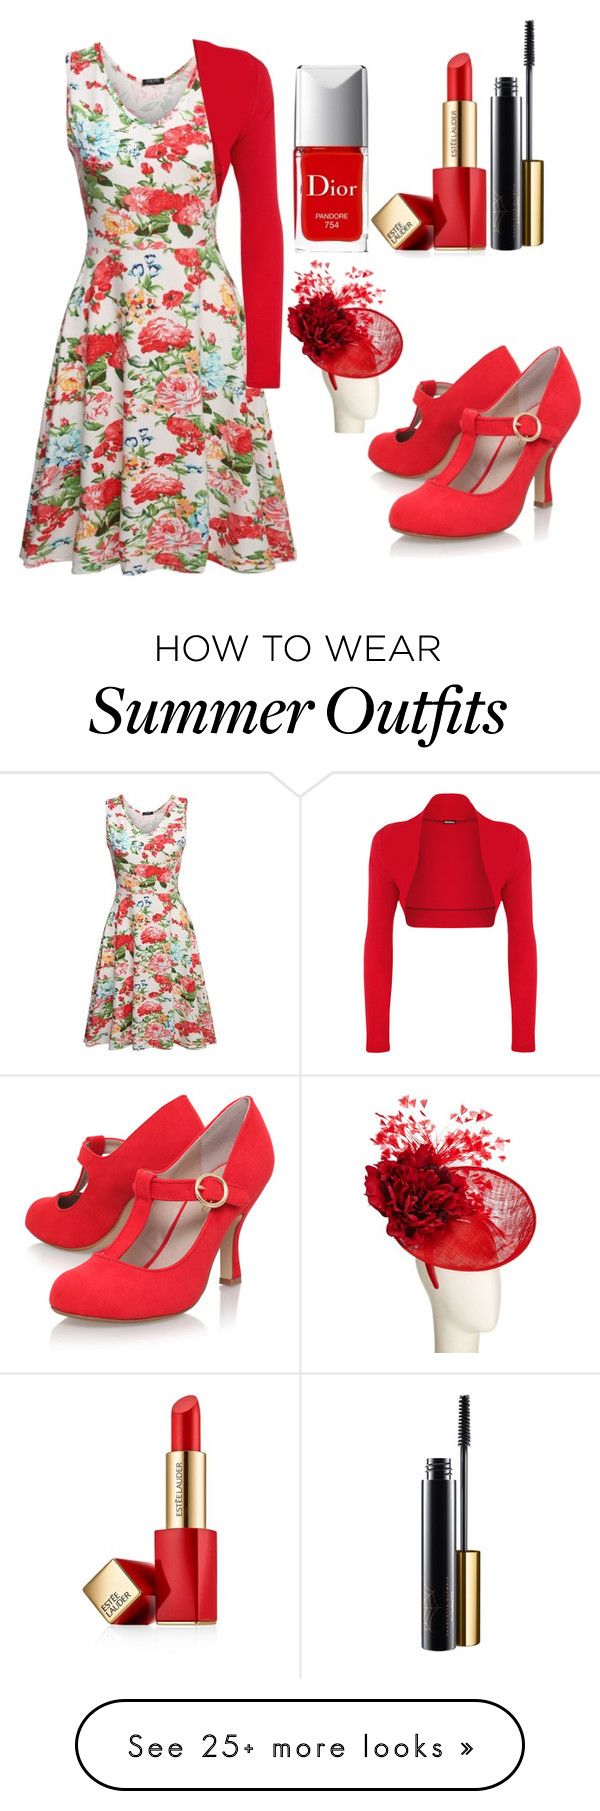 Summer Outfits : 